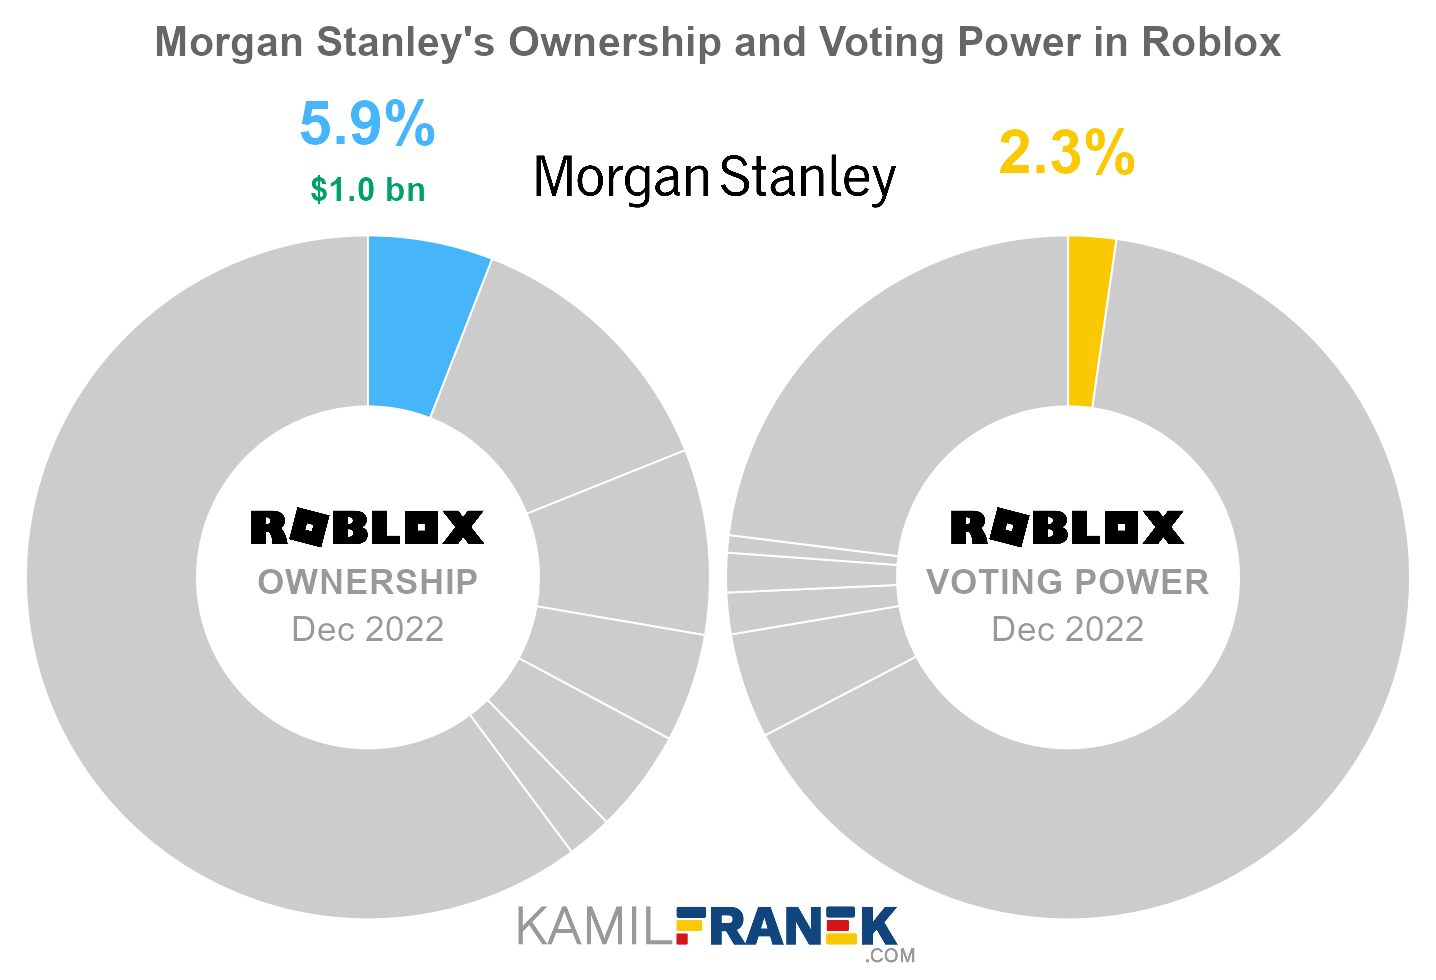 Morgan Stanley's share ownership and voting power in Roblox (chart)